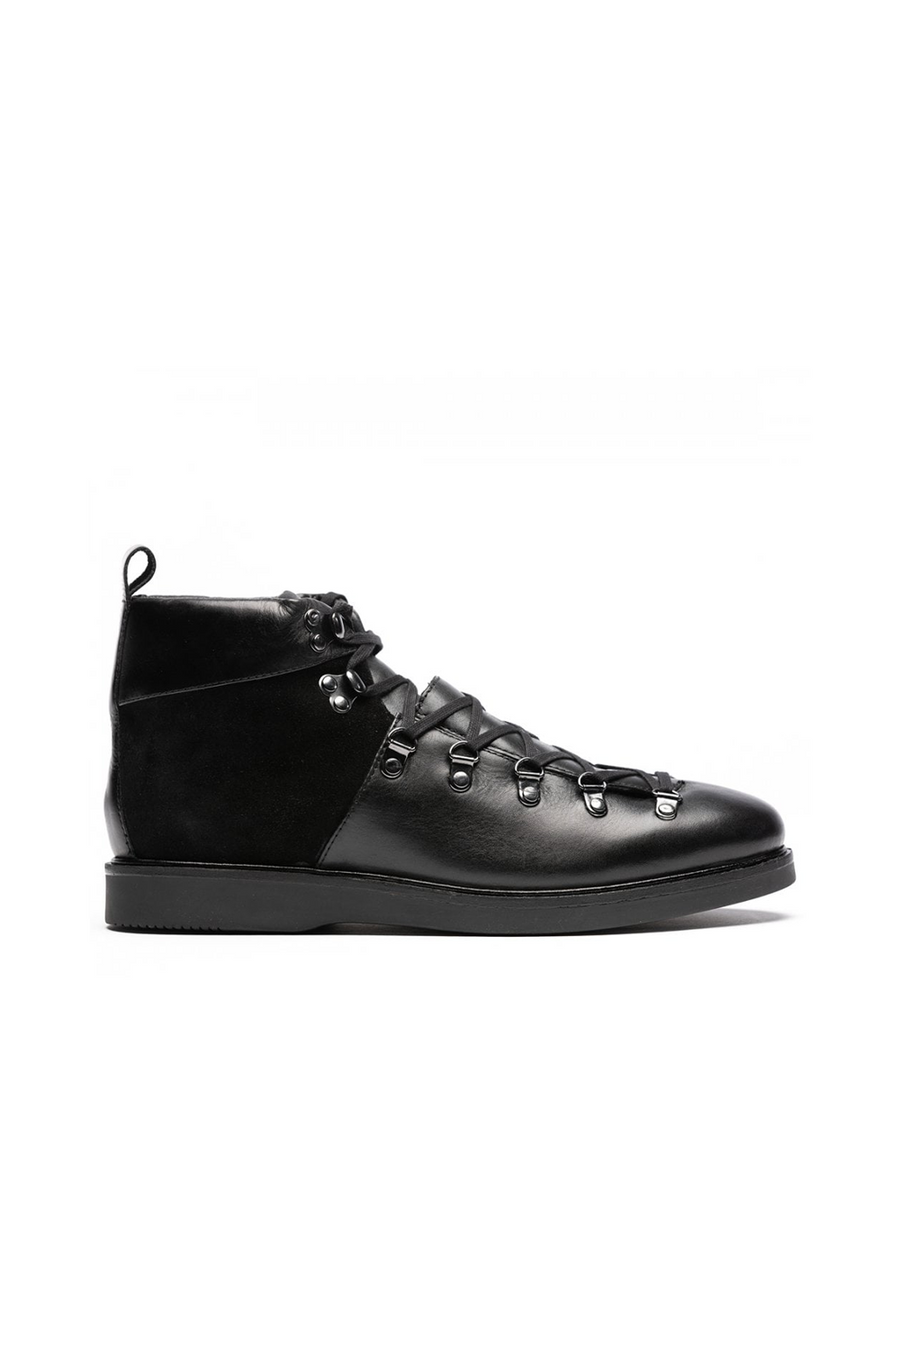 Buy the Hudson London Calverston Hiker Leather Boot Black at Intro. Spend £100 for free UK next day delivery. We ship worldwide.